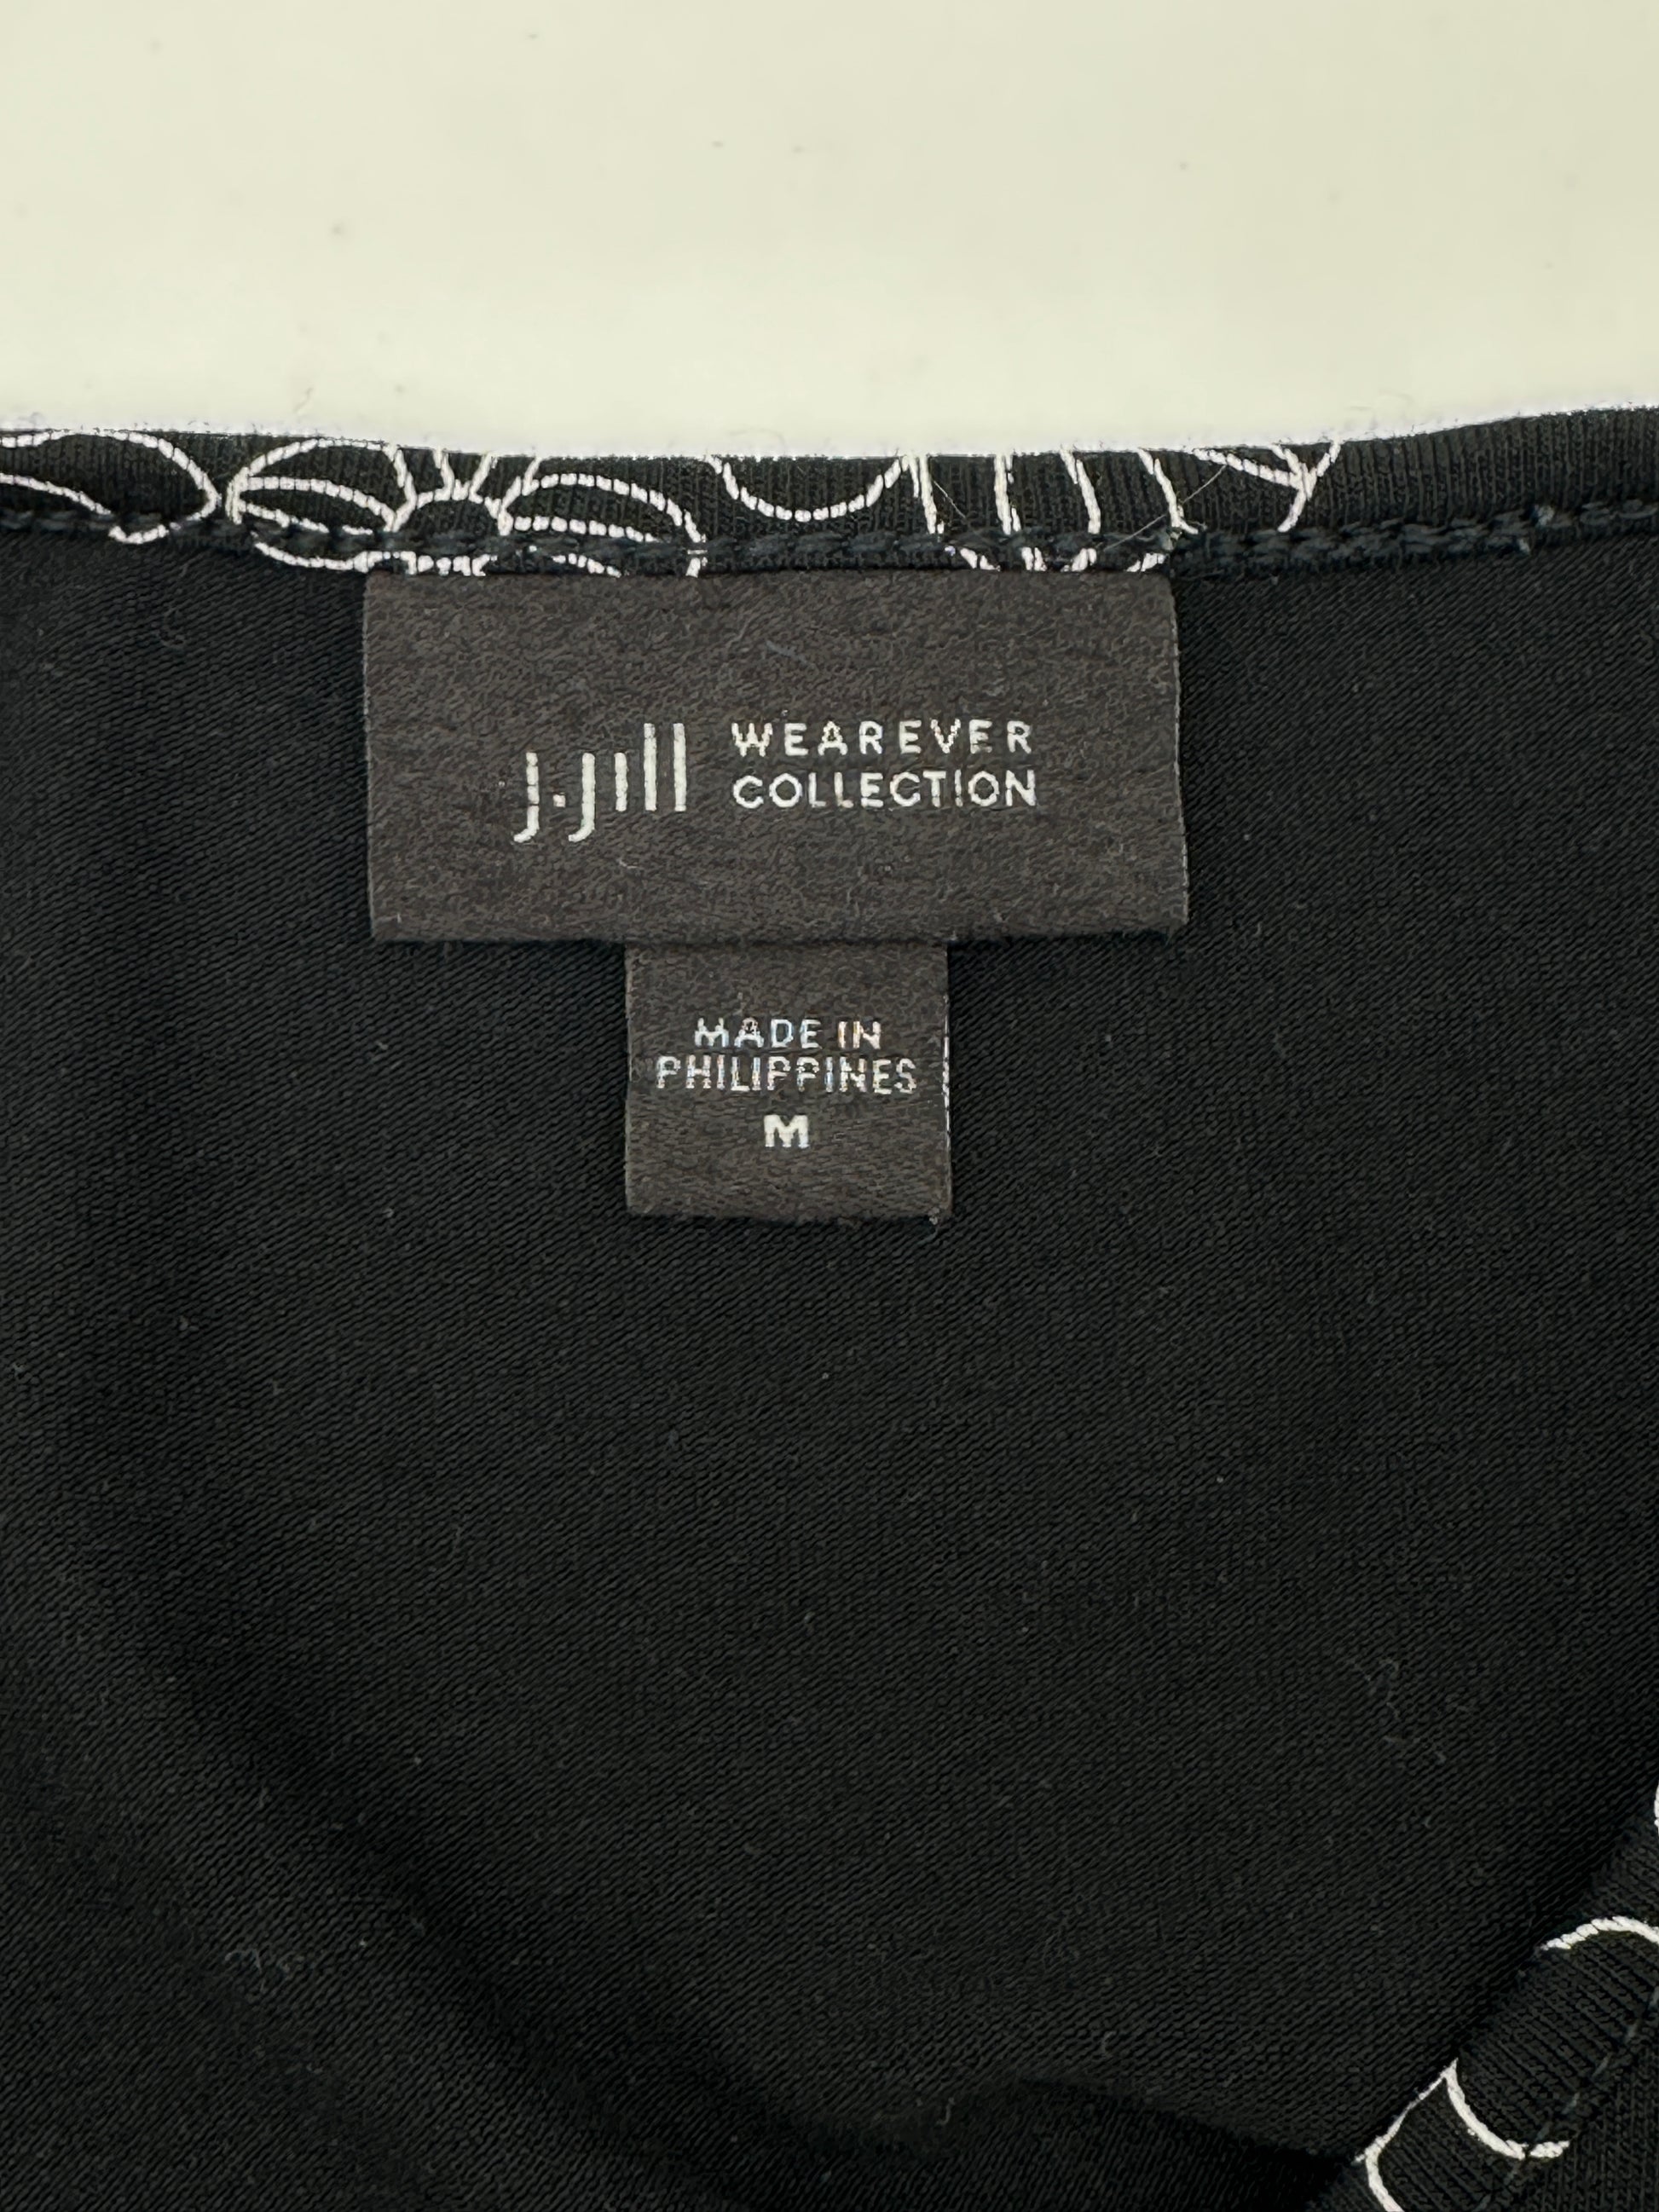 J Jill Wearever Top Womens Large Black Lace Lined Round Neck